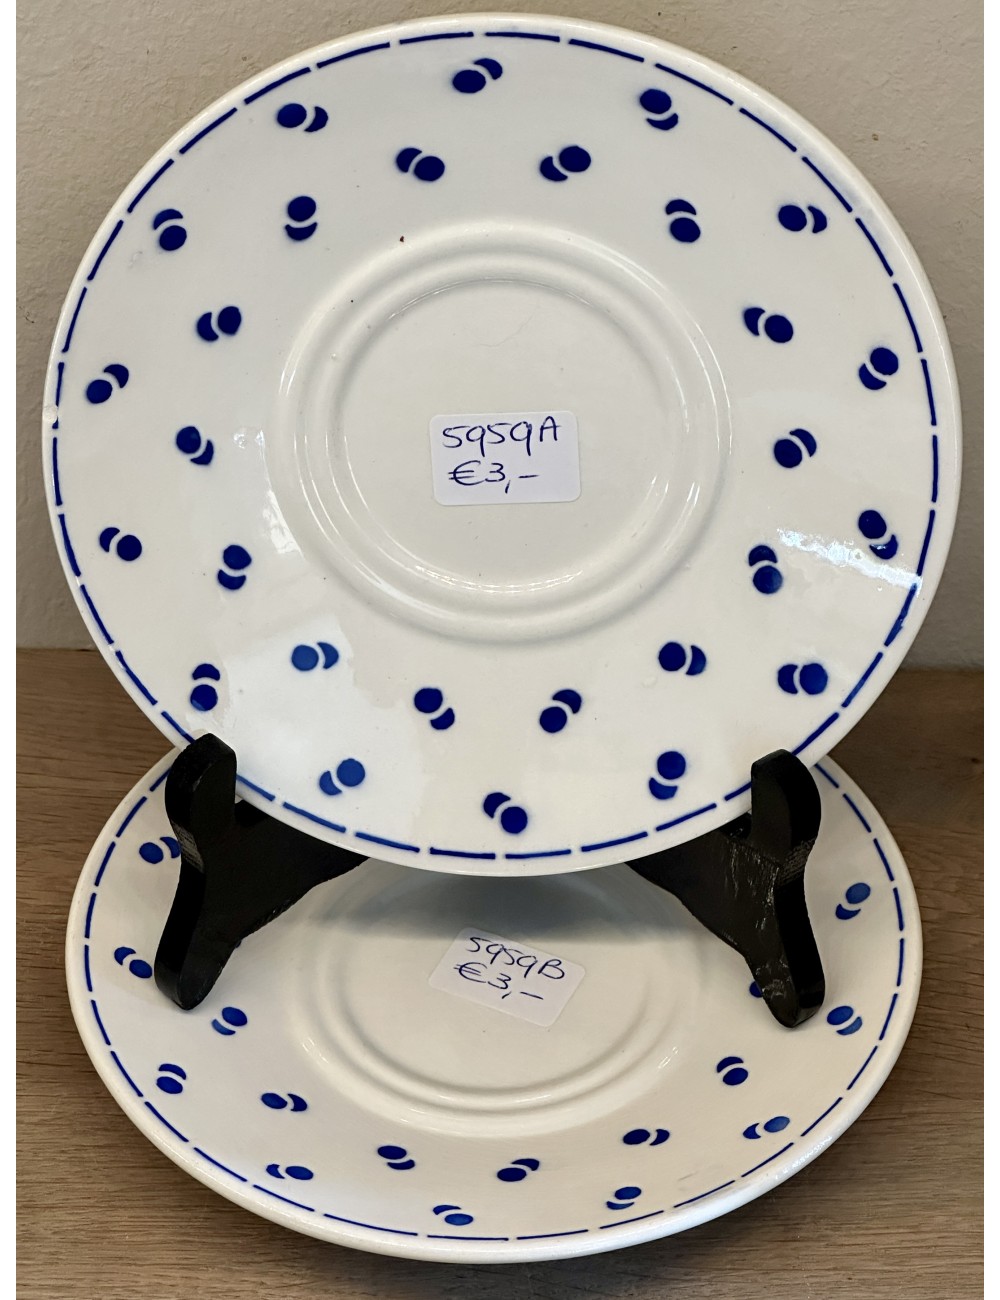 Saucer / Dish - Boch - décor of blue, overlapping, dots/dots